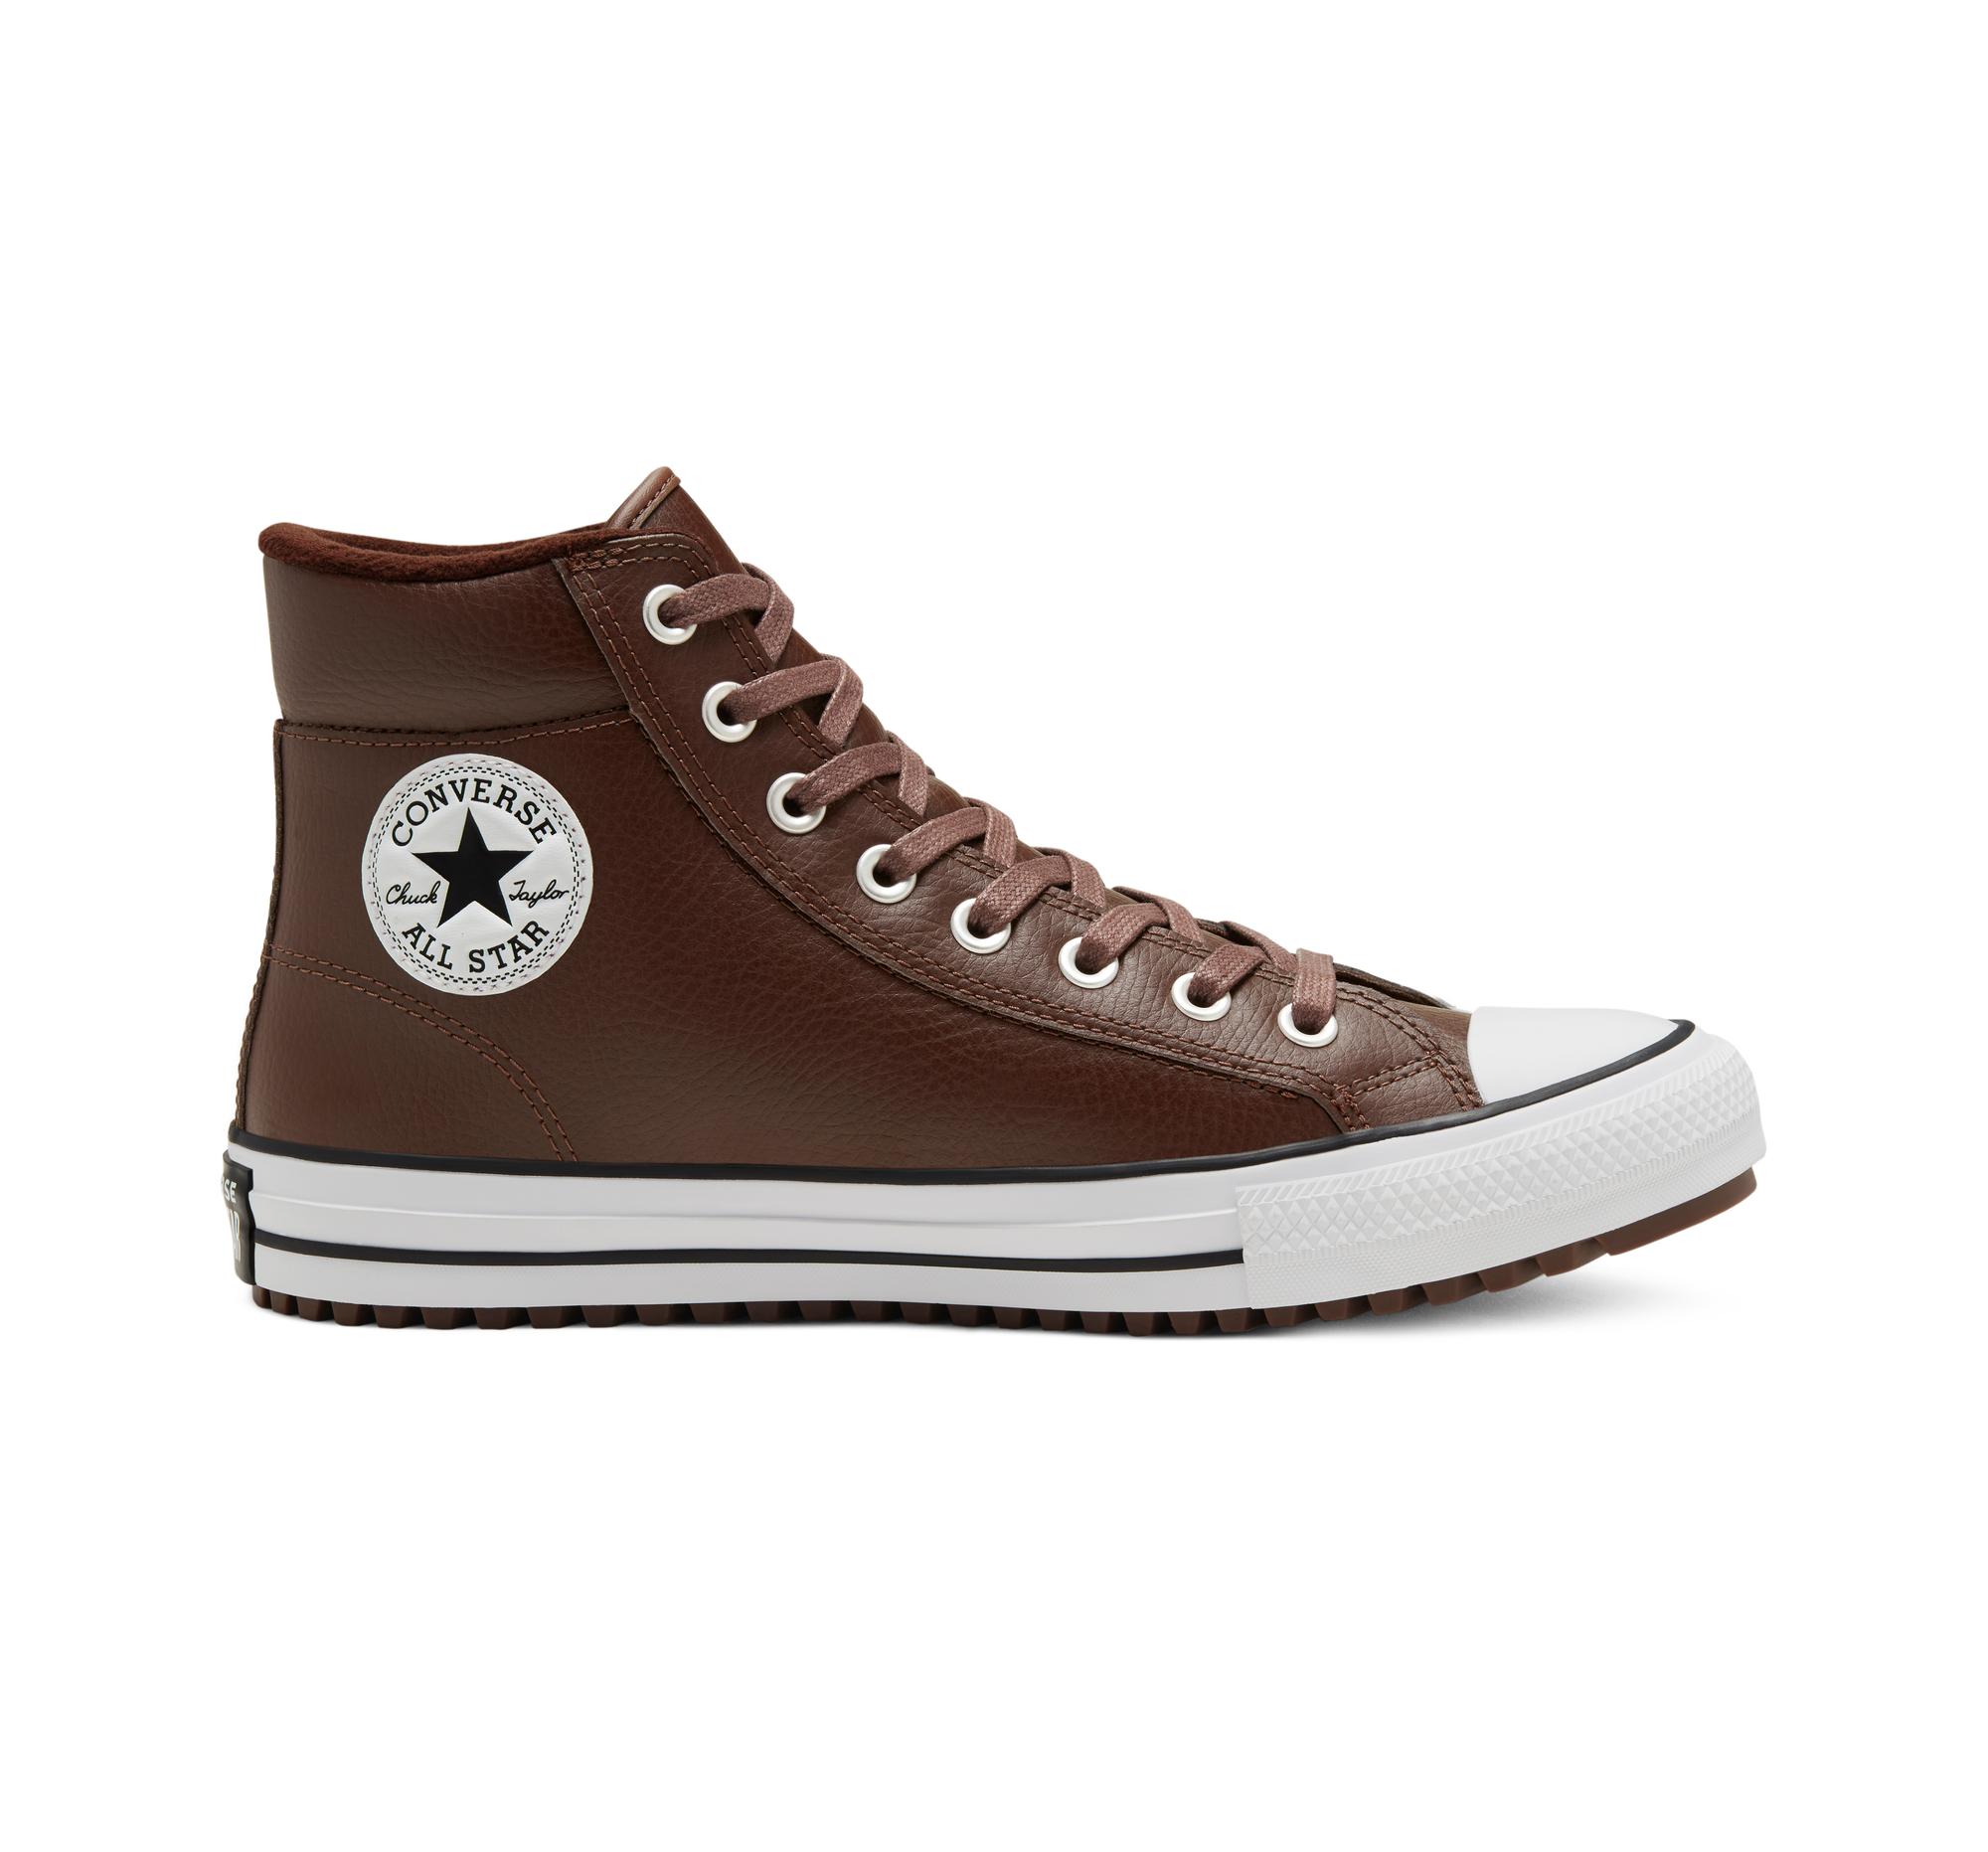 Converse Utility Chuck Taylor All Star Pc Boot in Brown - Lyst